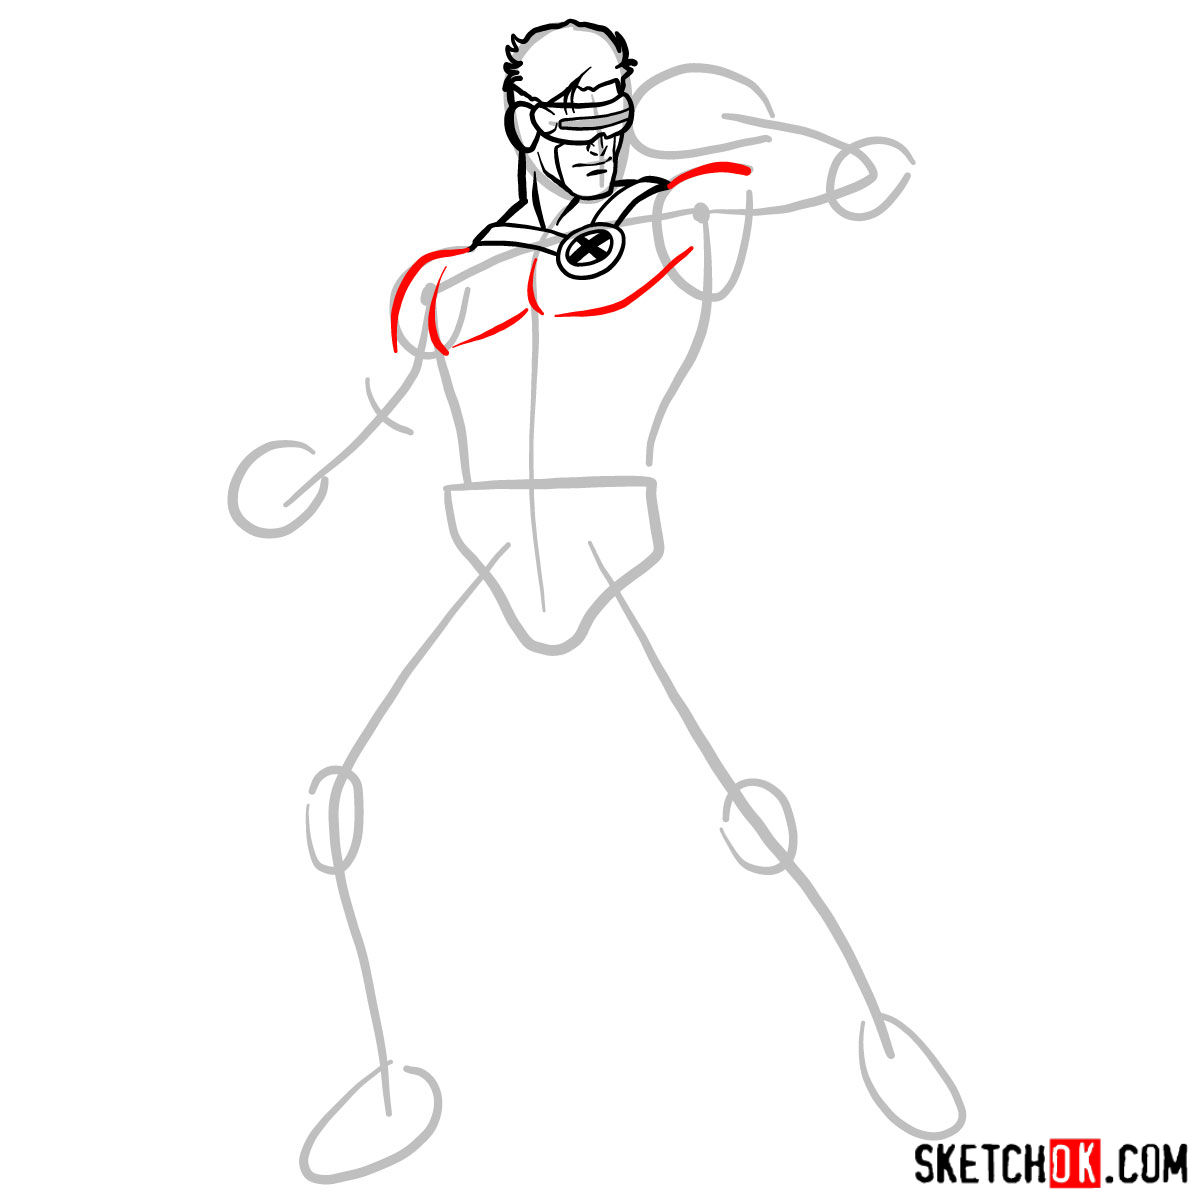 How to draw Cyclops from X-Men - step 07